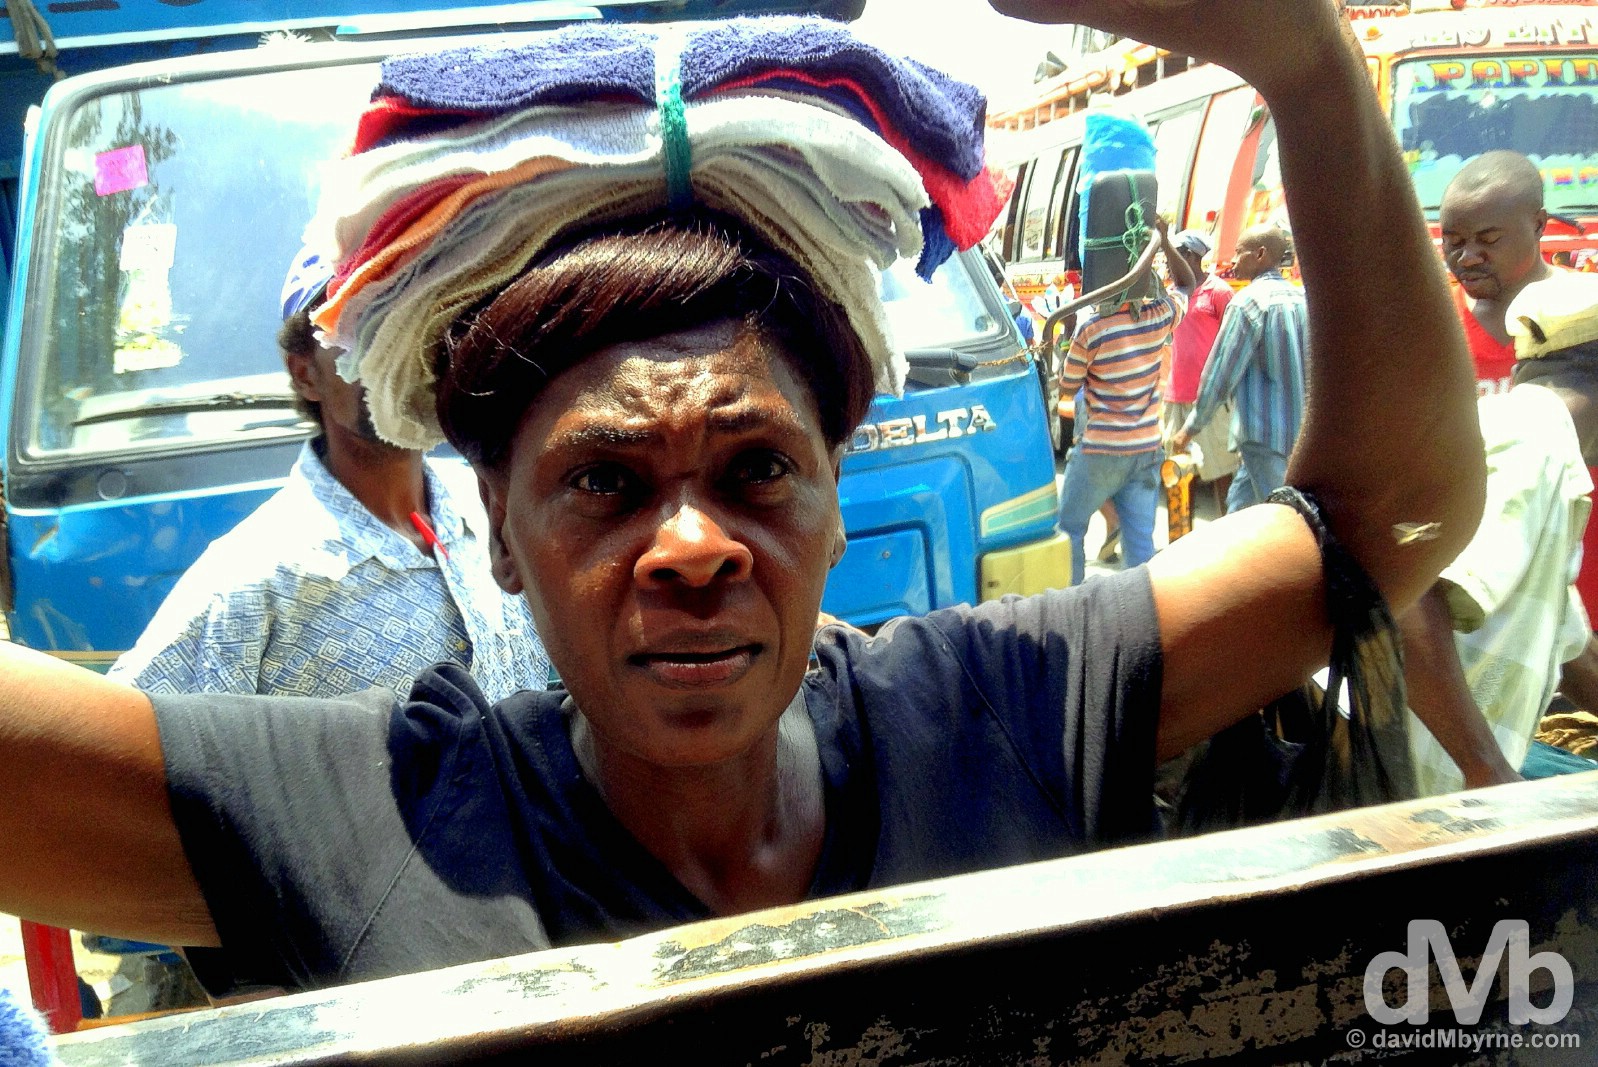 A vendor peddling her wares to bus passengers in Port-au-Prince, Haiti. May 19, 2015.